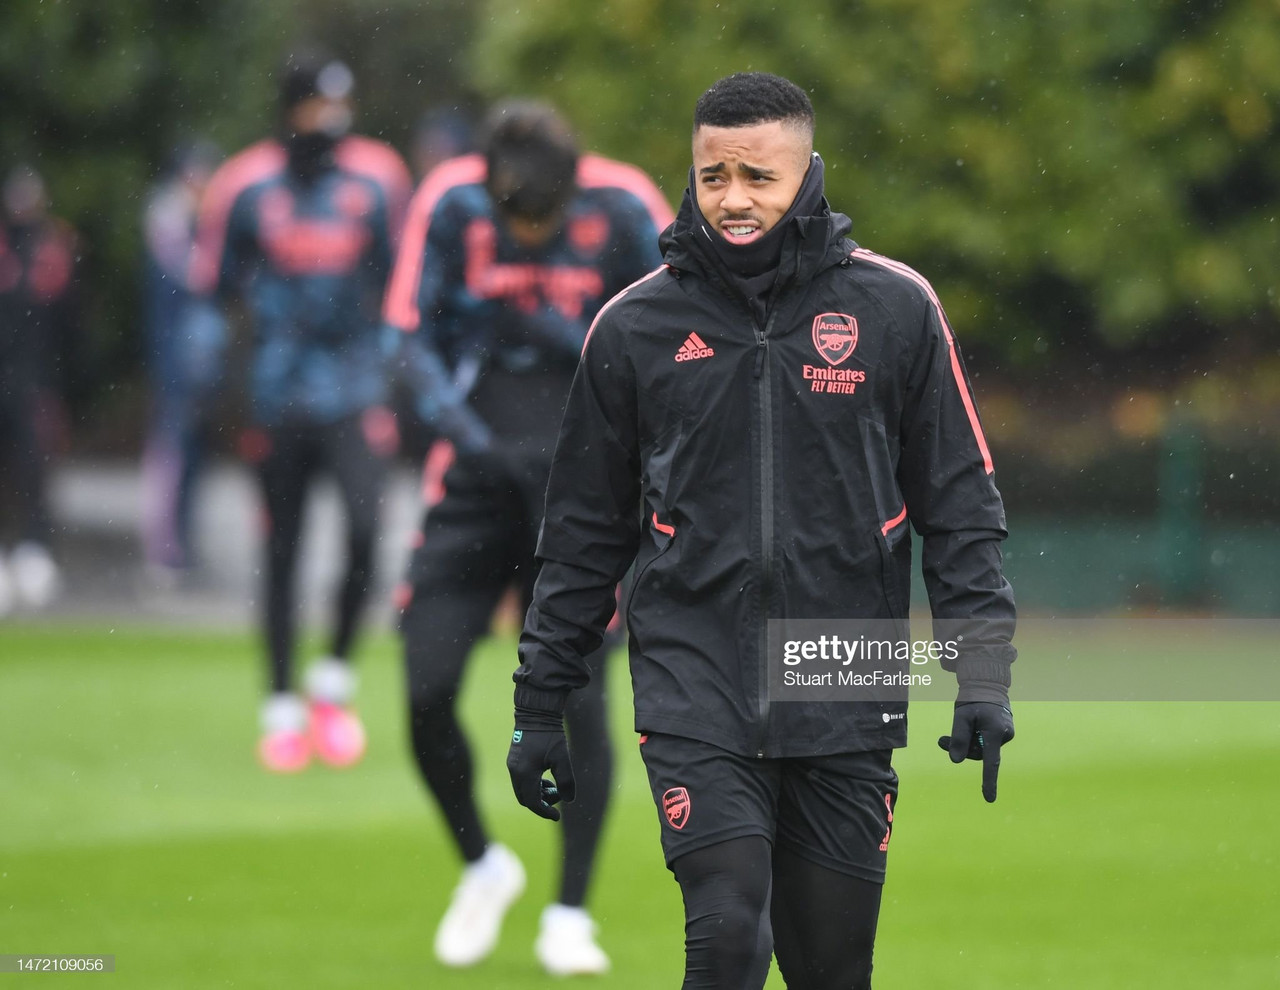 Gabriel Jesus in, Tierney out? all the latest from Arsenal’s London Colney training centre ahead of their Europa League clash